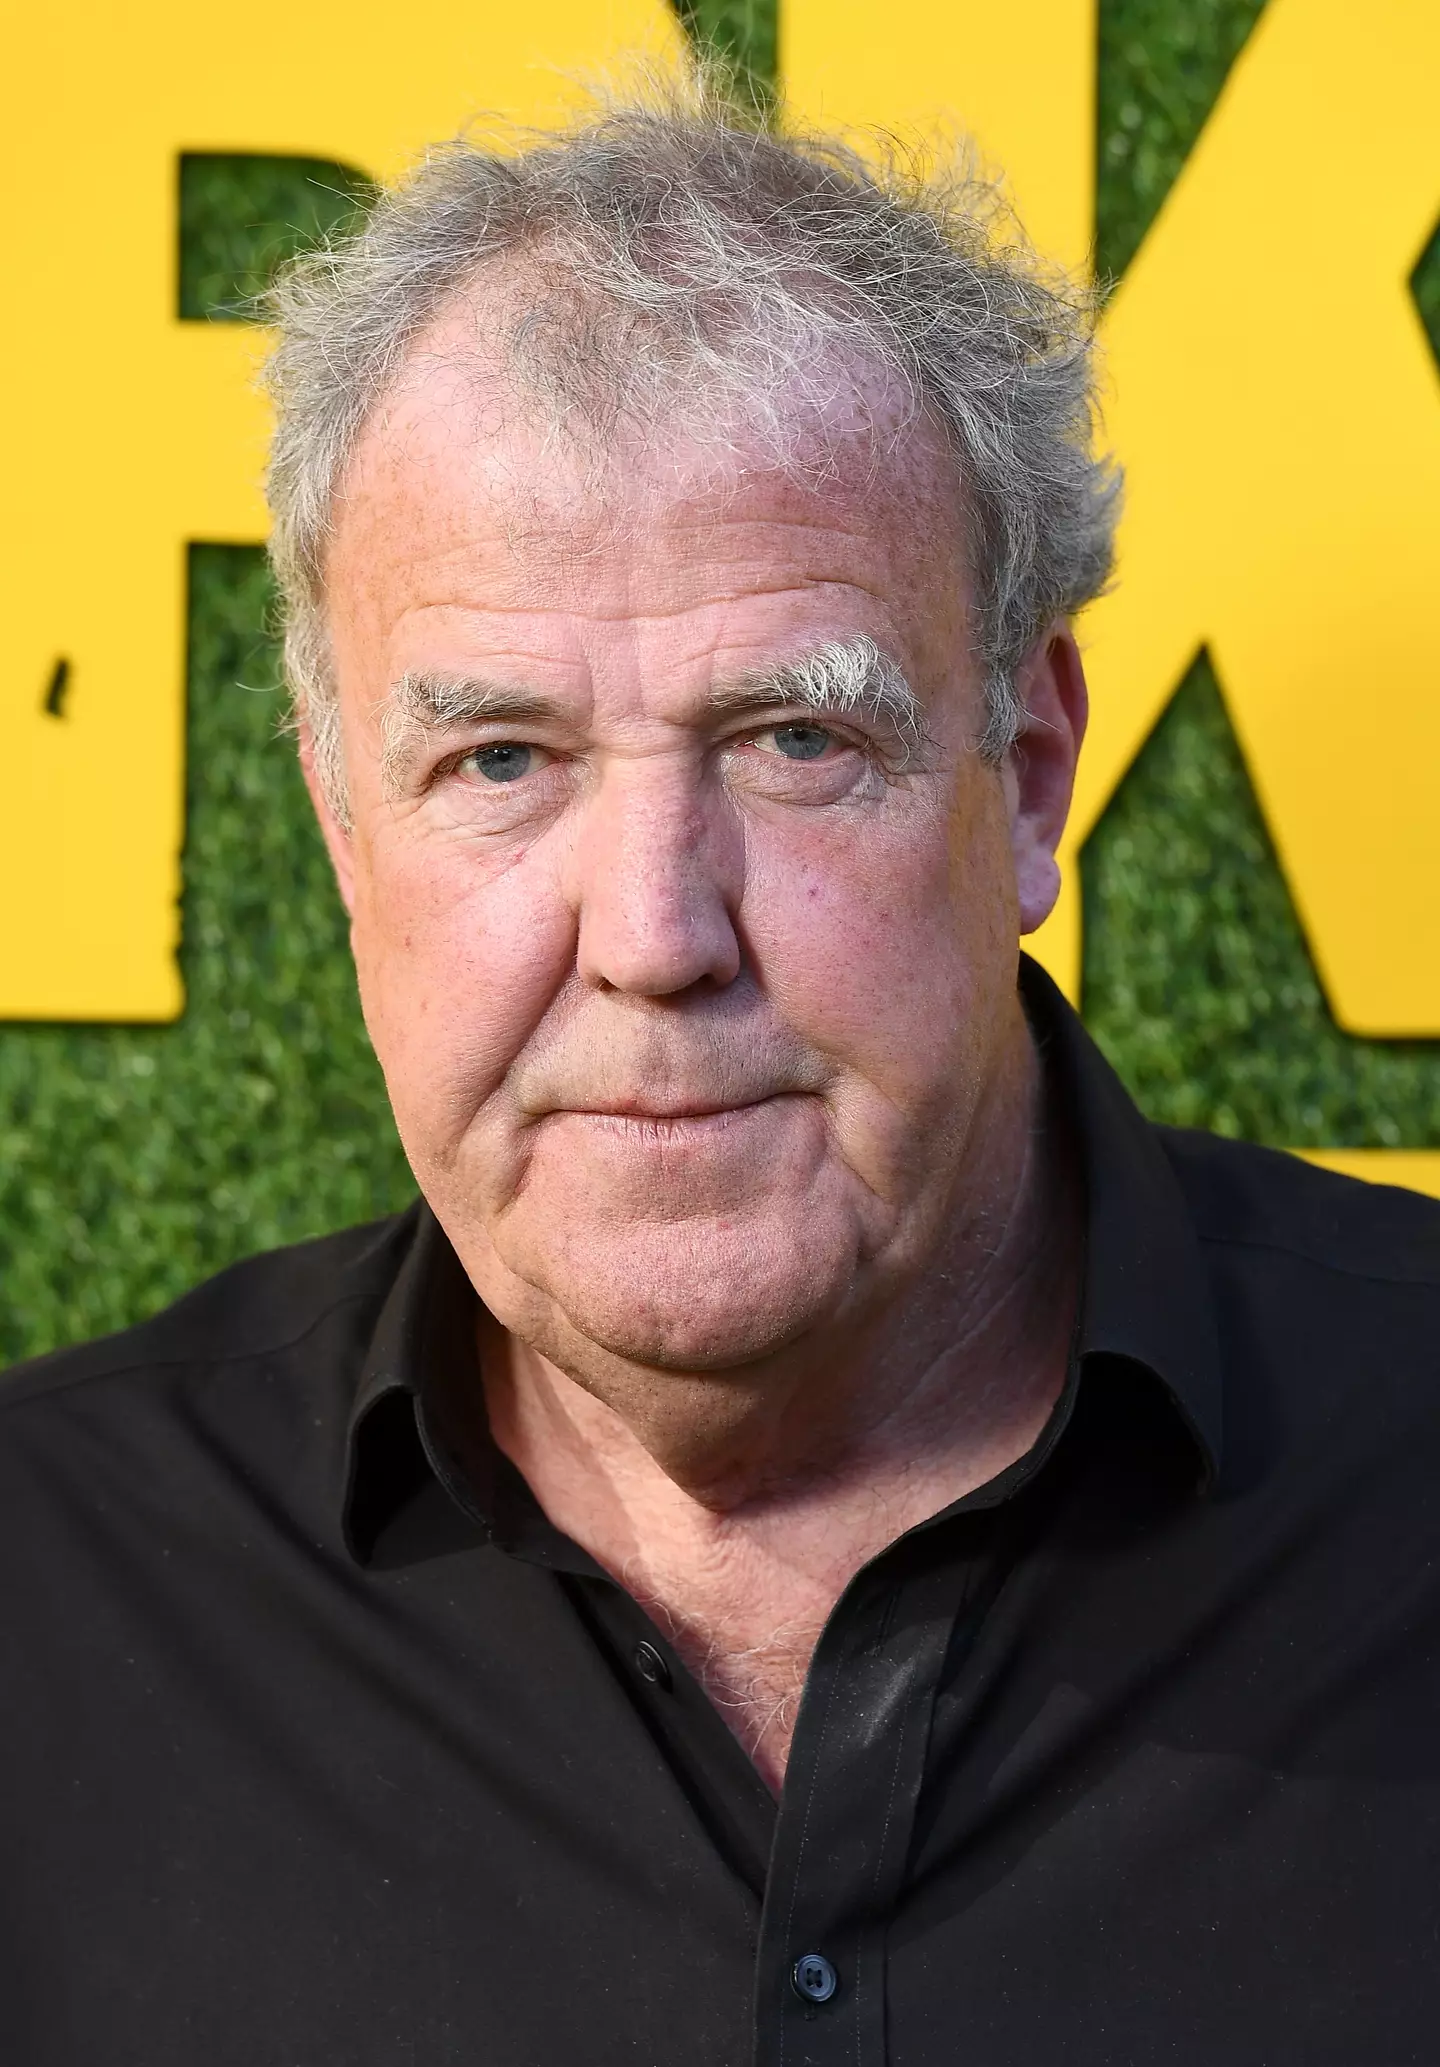 Jeremy Clarkson has revealed some of the financial worries he's had at the farm.